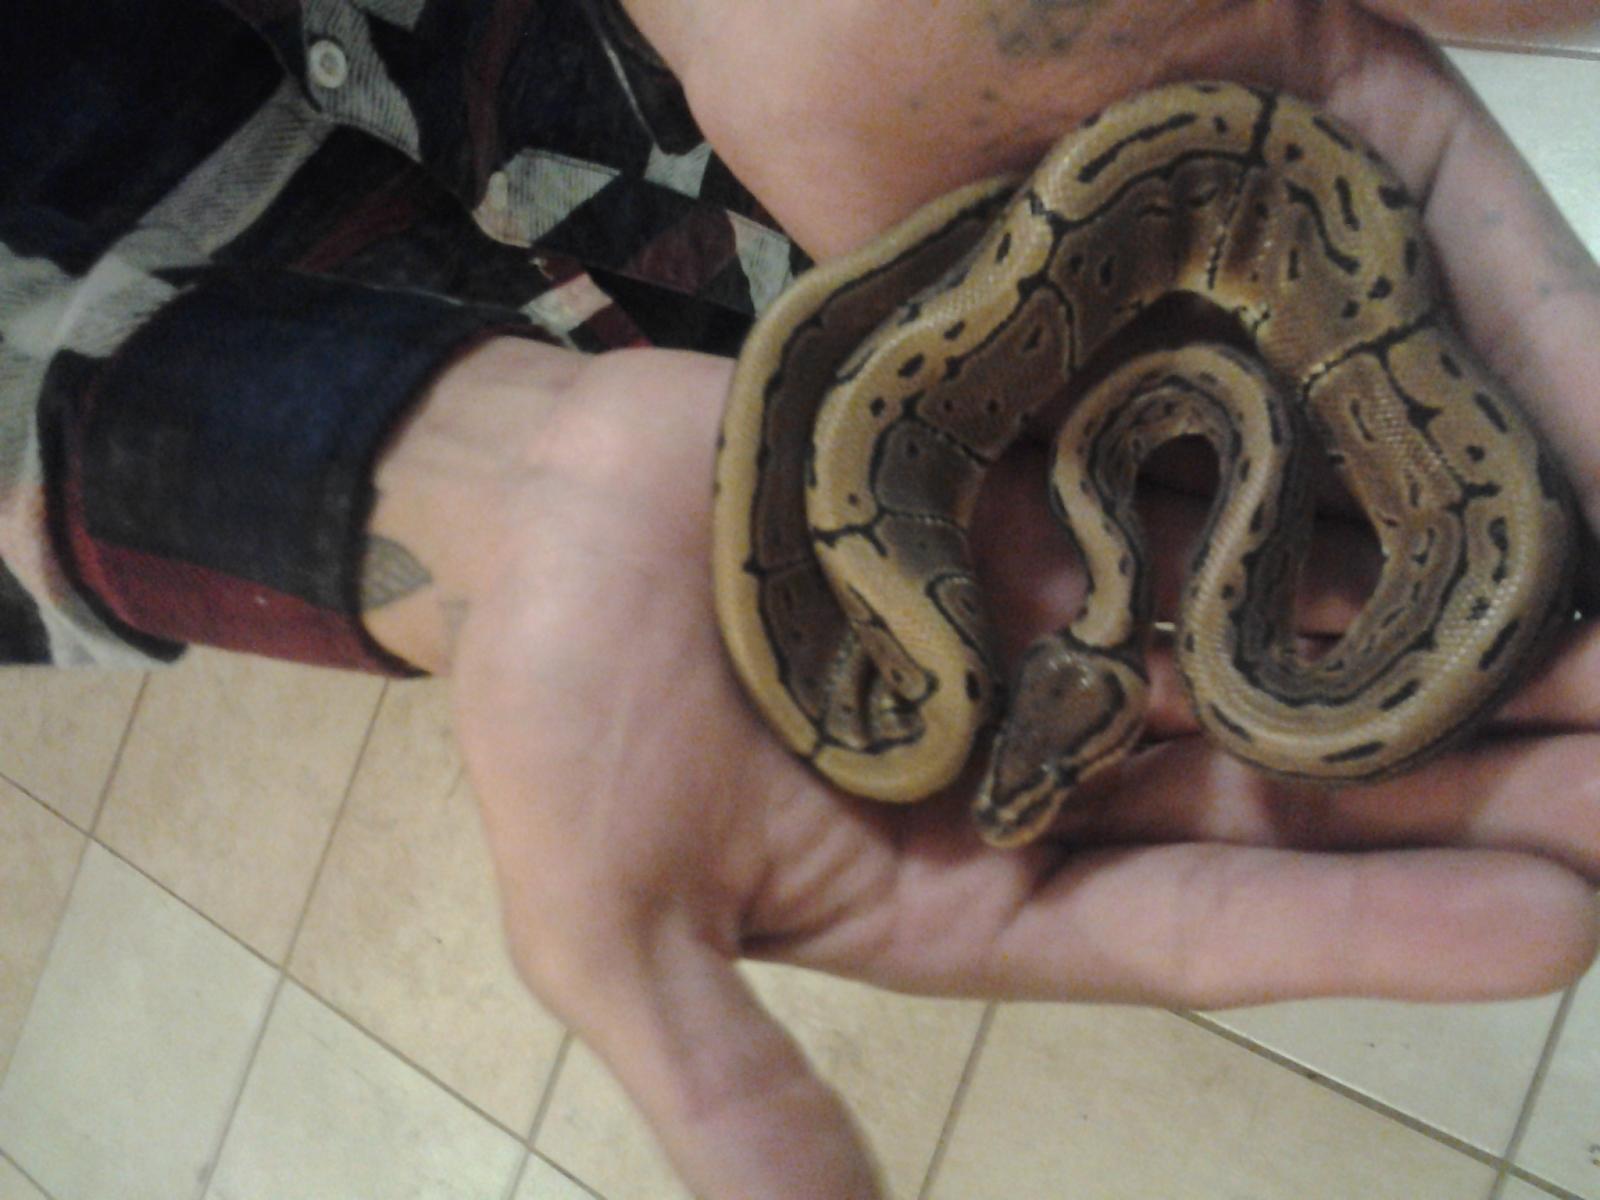 does anybody know what kind of ball python this is?